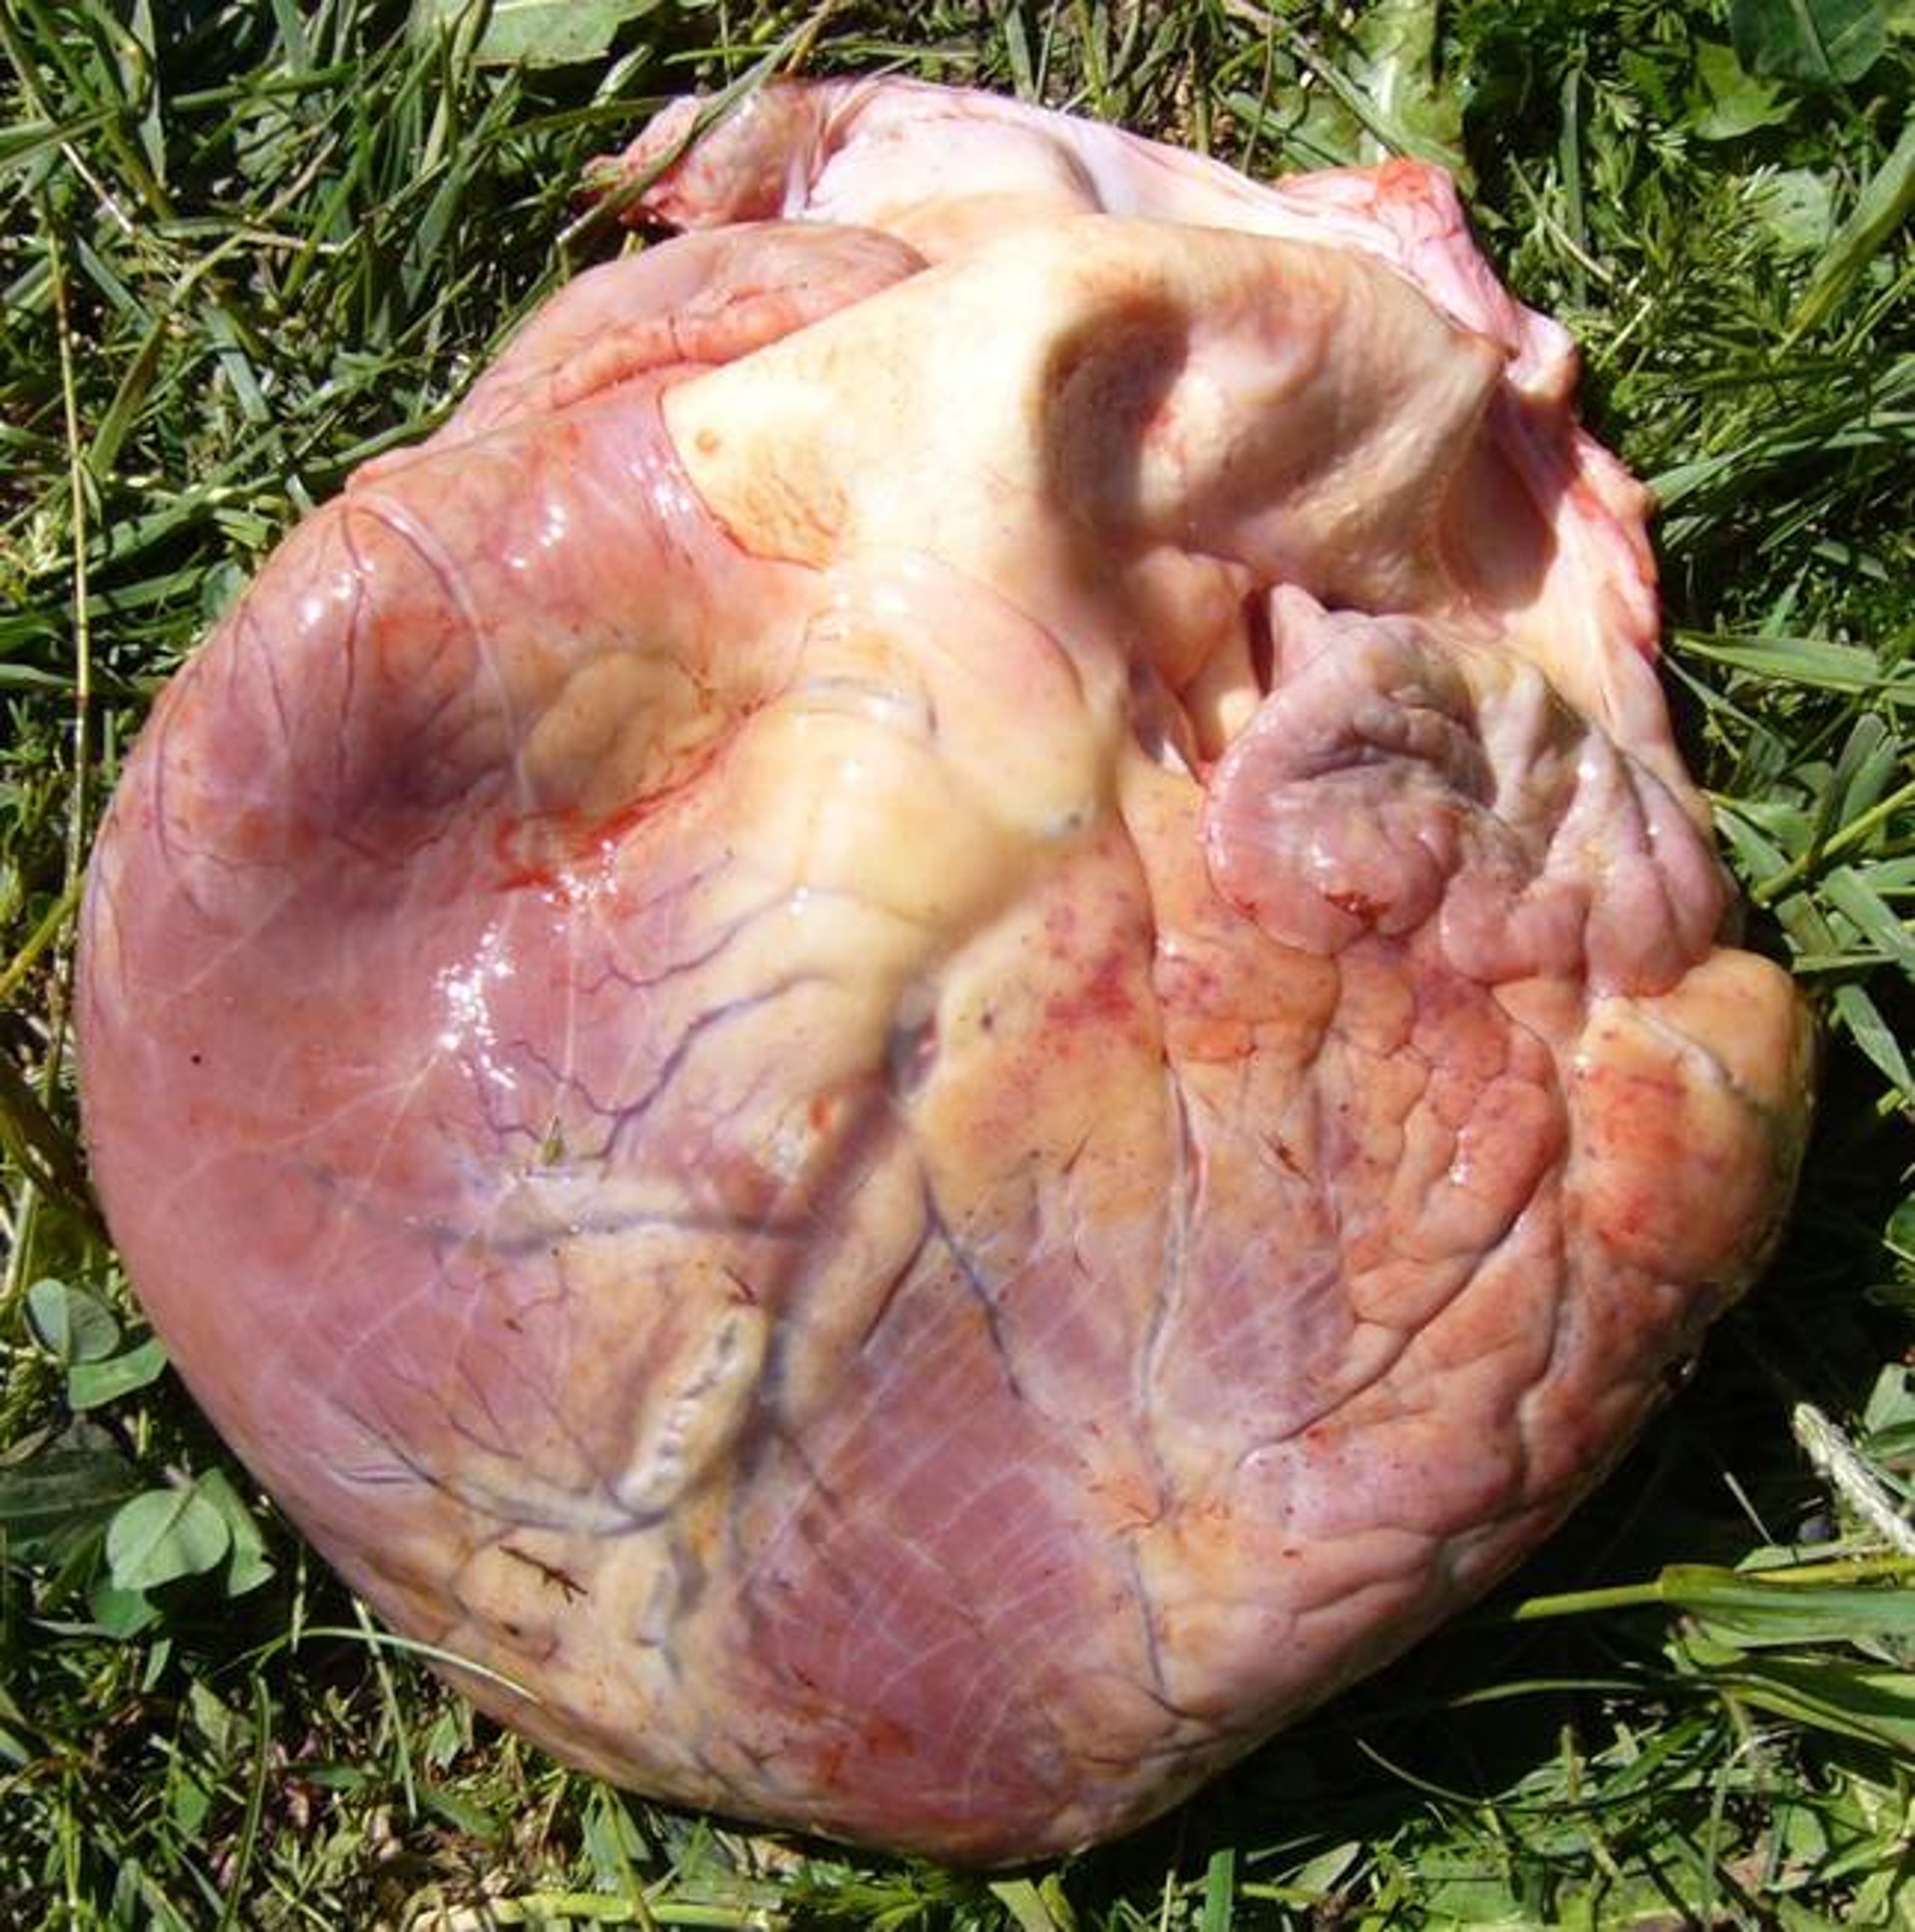 Grade 5 heart from steer with bovine high-mountain disease